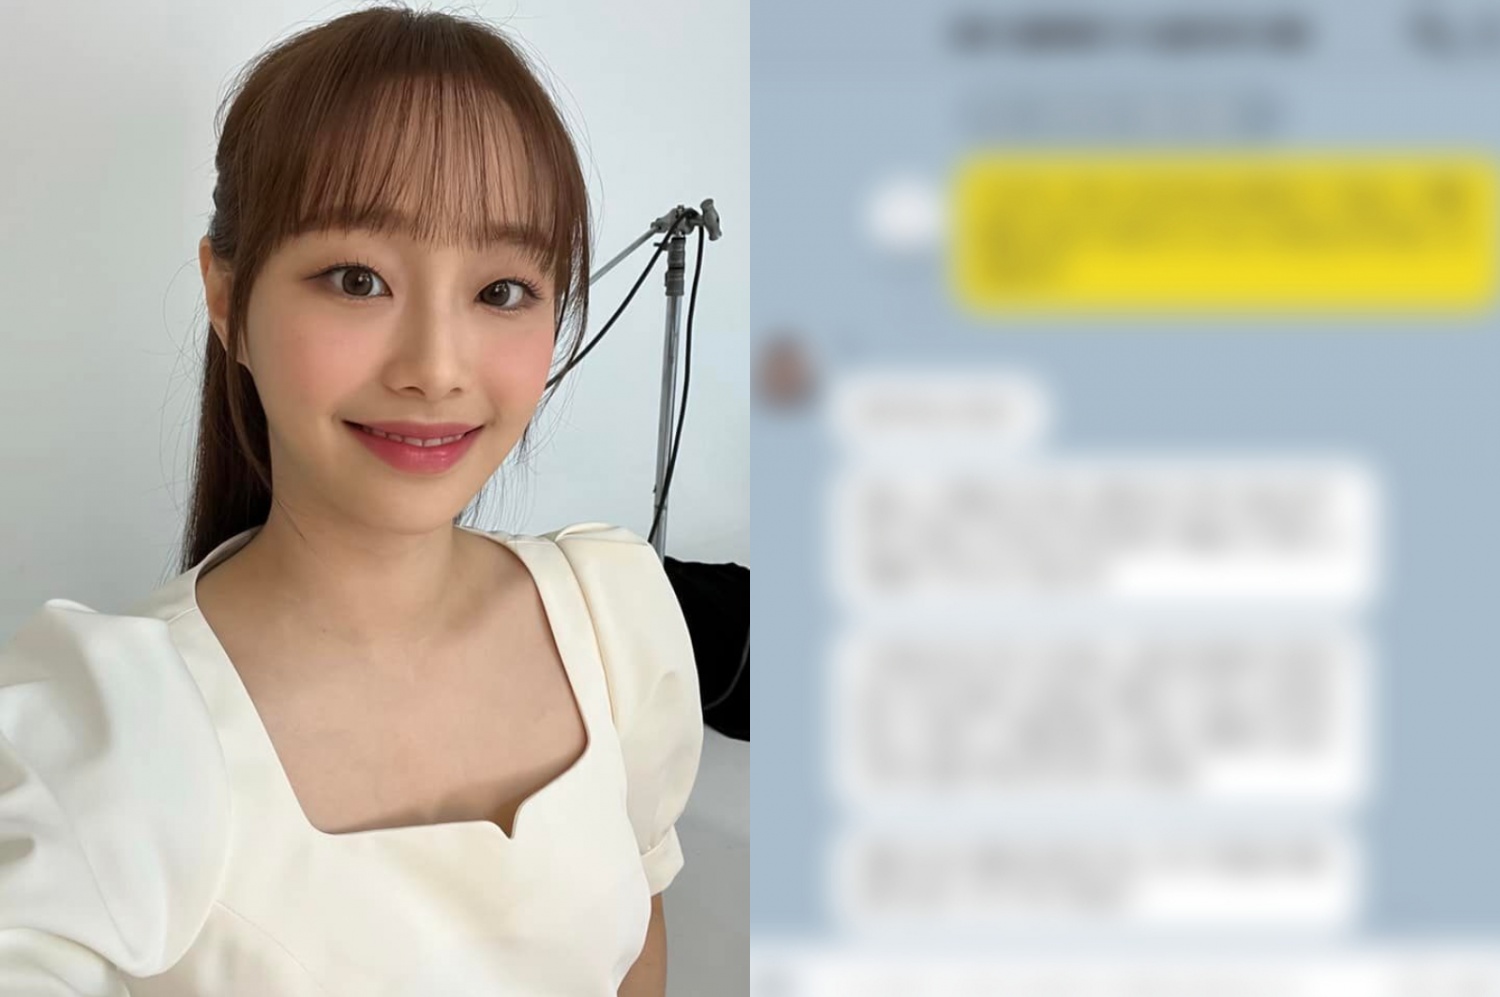 The mailing reveals Blockberry Creative’s messages deemed evidence of ex-LOONA Chuu’s “abuse of power”.